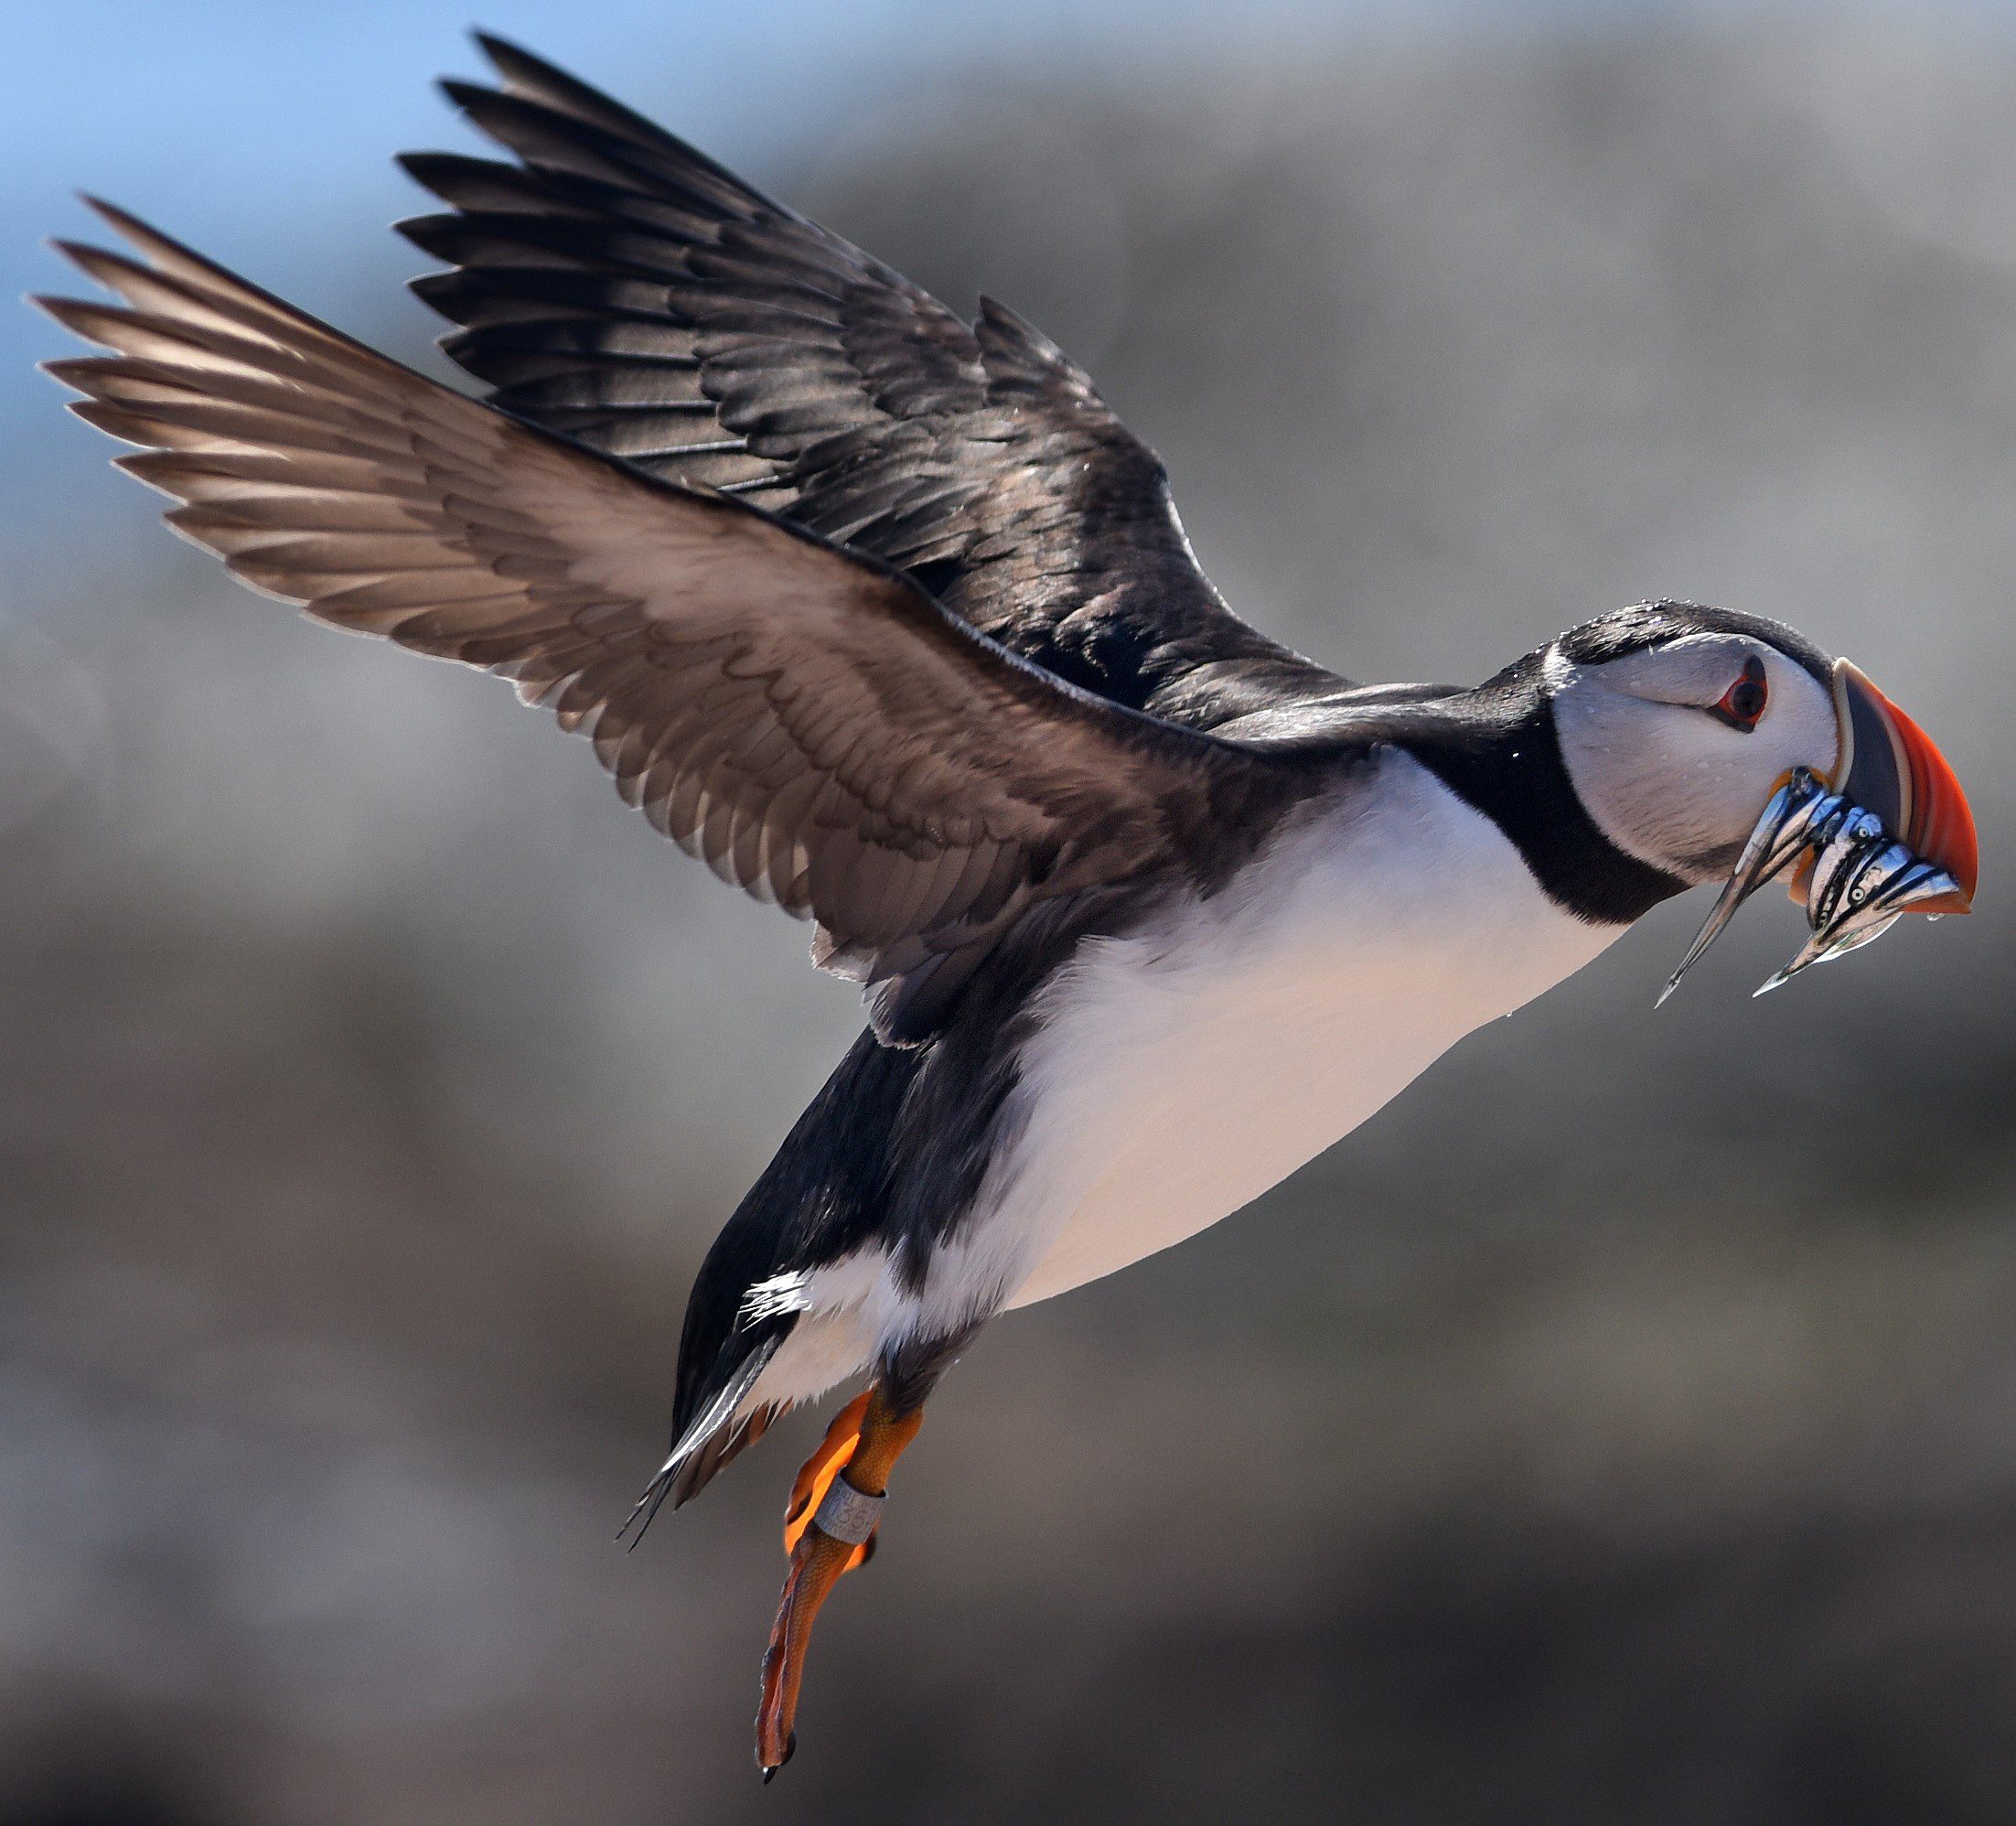 A petit puffin flies through the air with fish in its beak